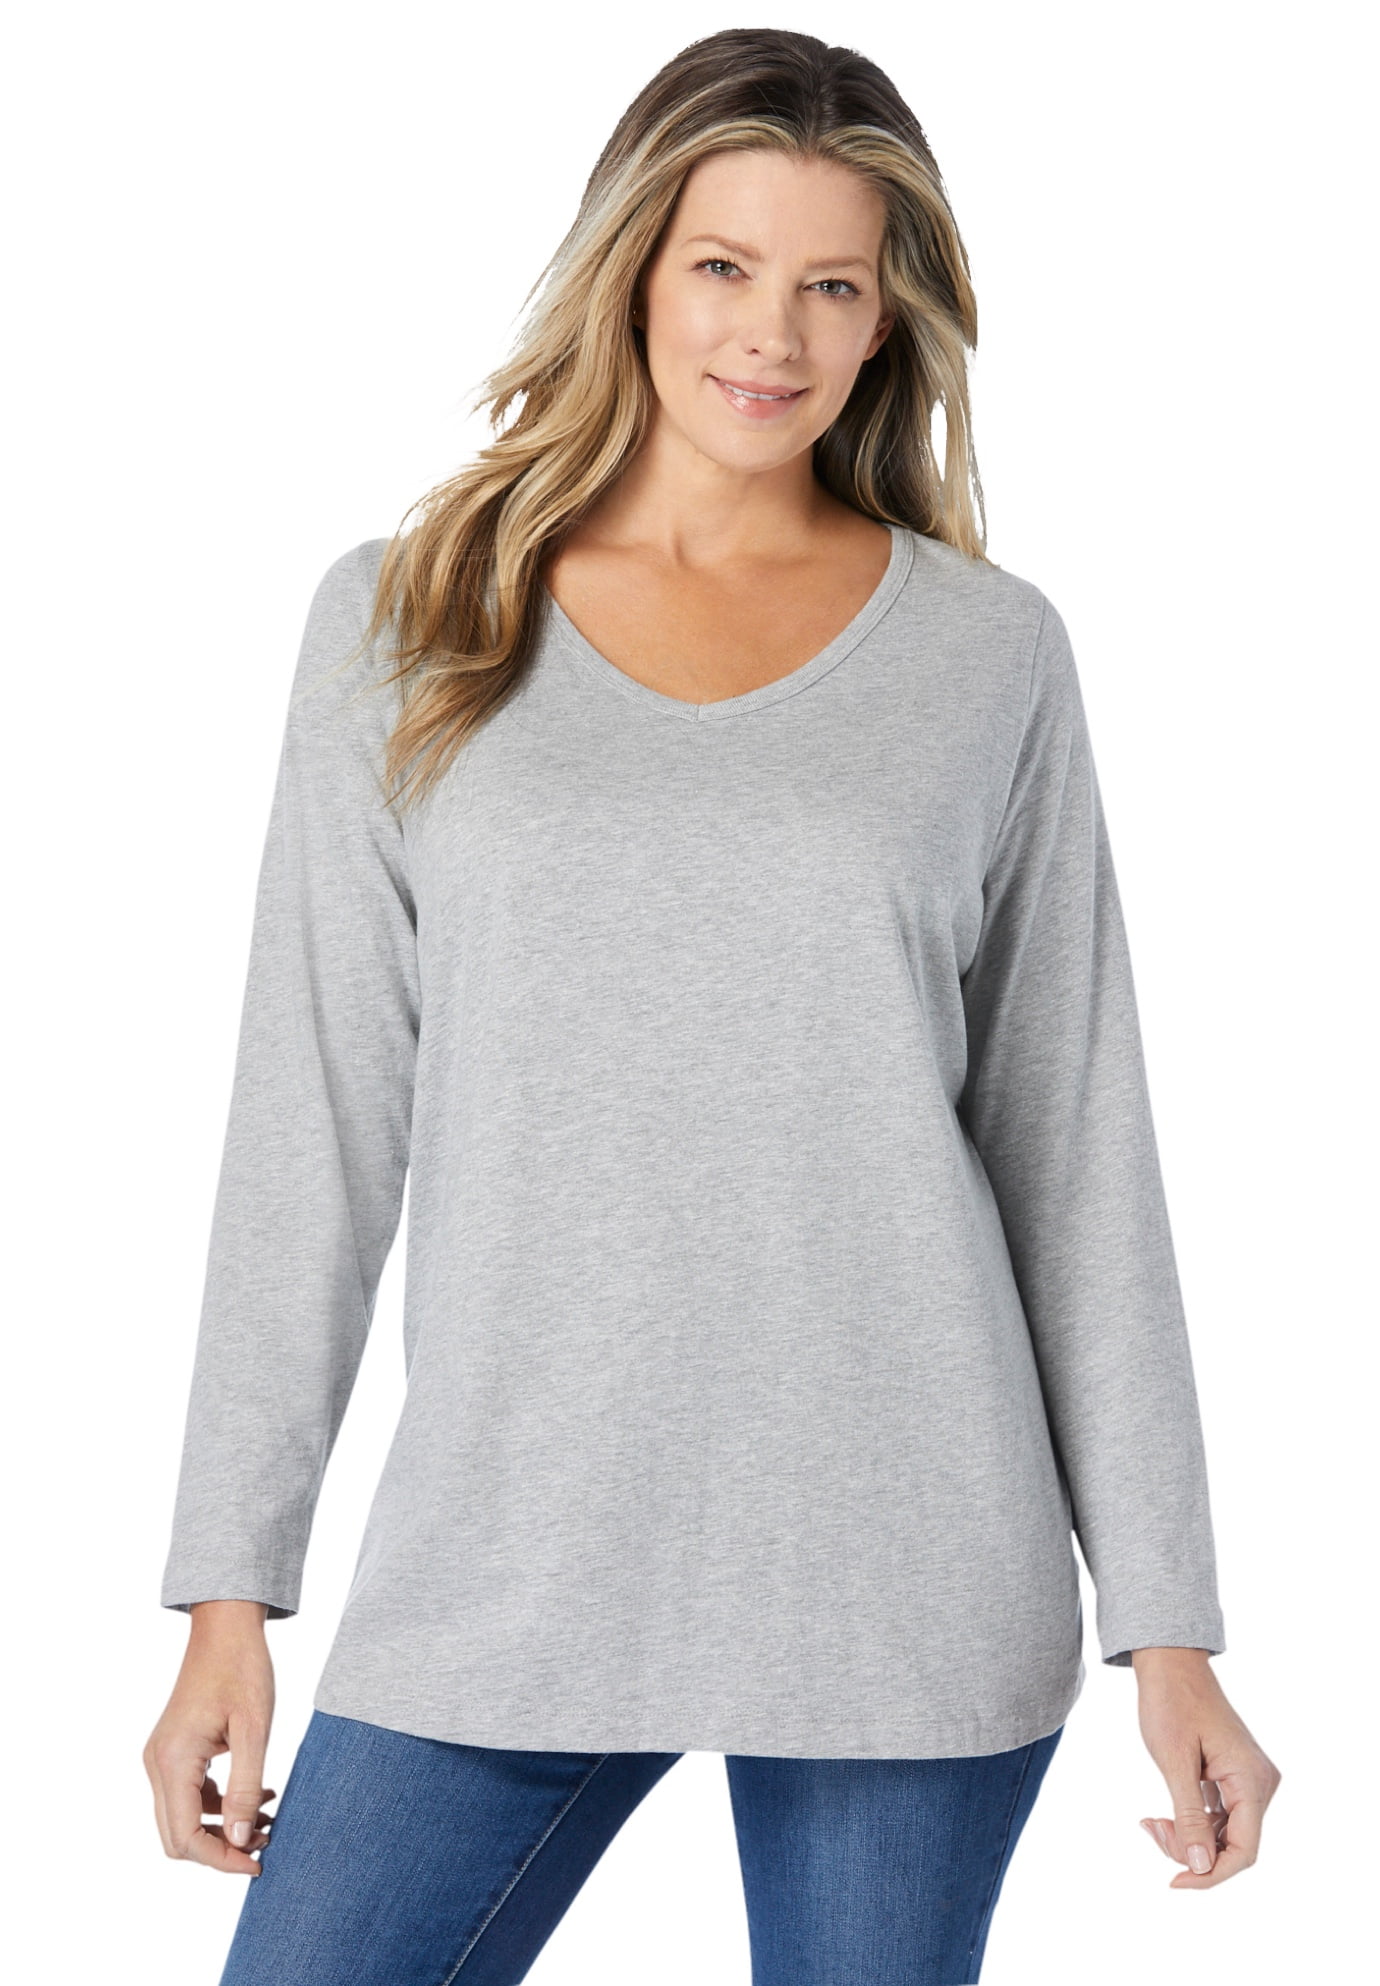 Discount Shop Woman Within Women's Plus Size Perfect Long-Sleeve V-Neck ...